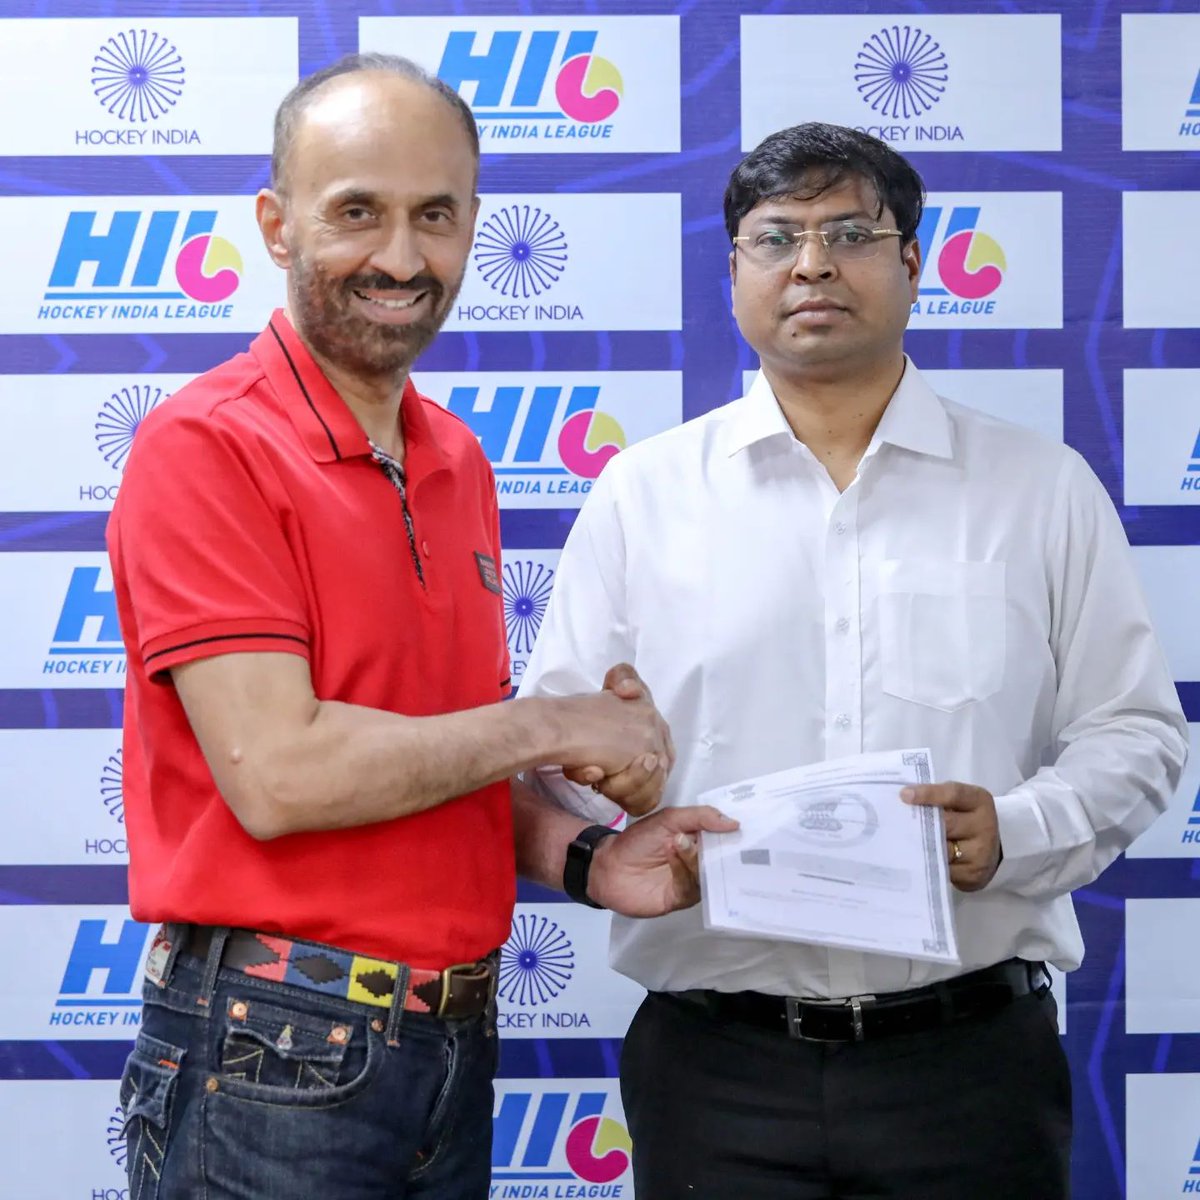 Good news for hockey fans!

Hockey India has announced exclusive commercial and marketing agency for the re-launch of Hockey India League.

Couple of city-based franchise teams from southern states would make the league more interesting.